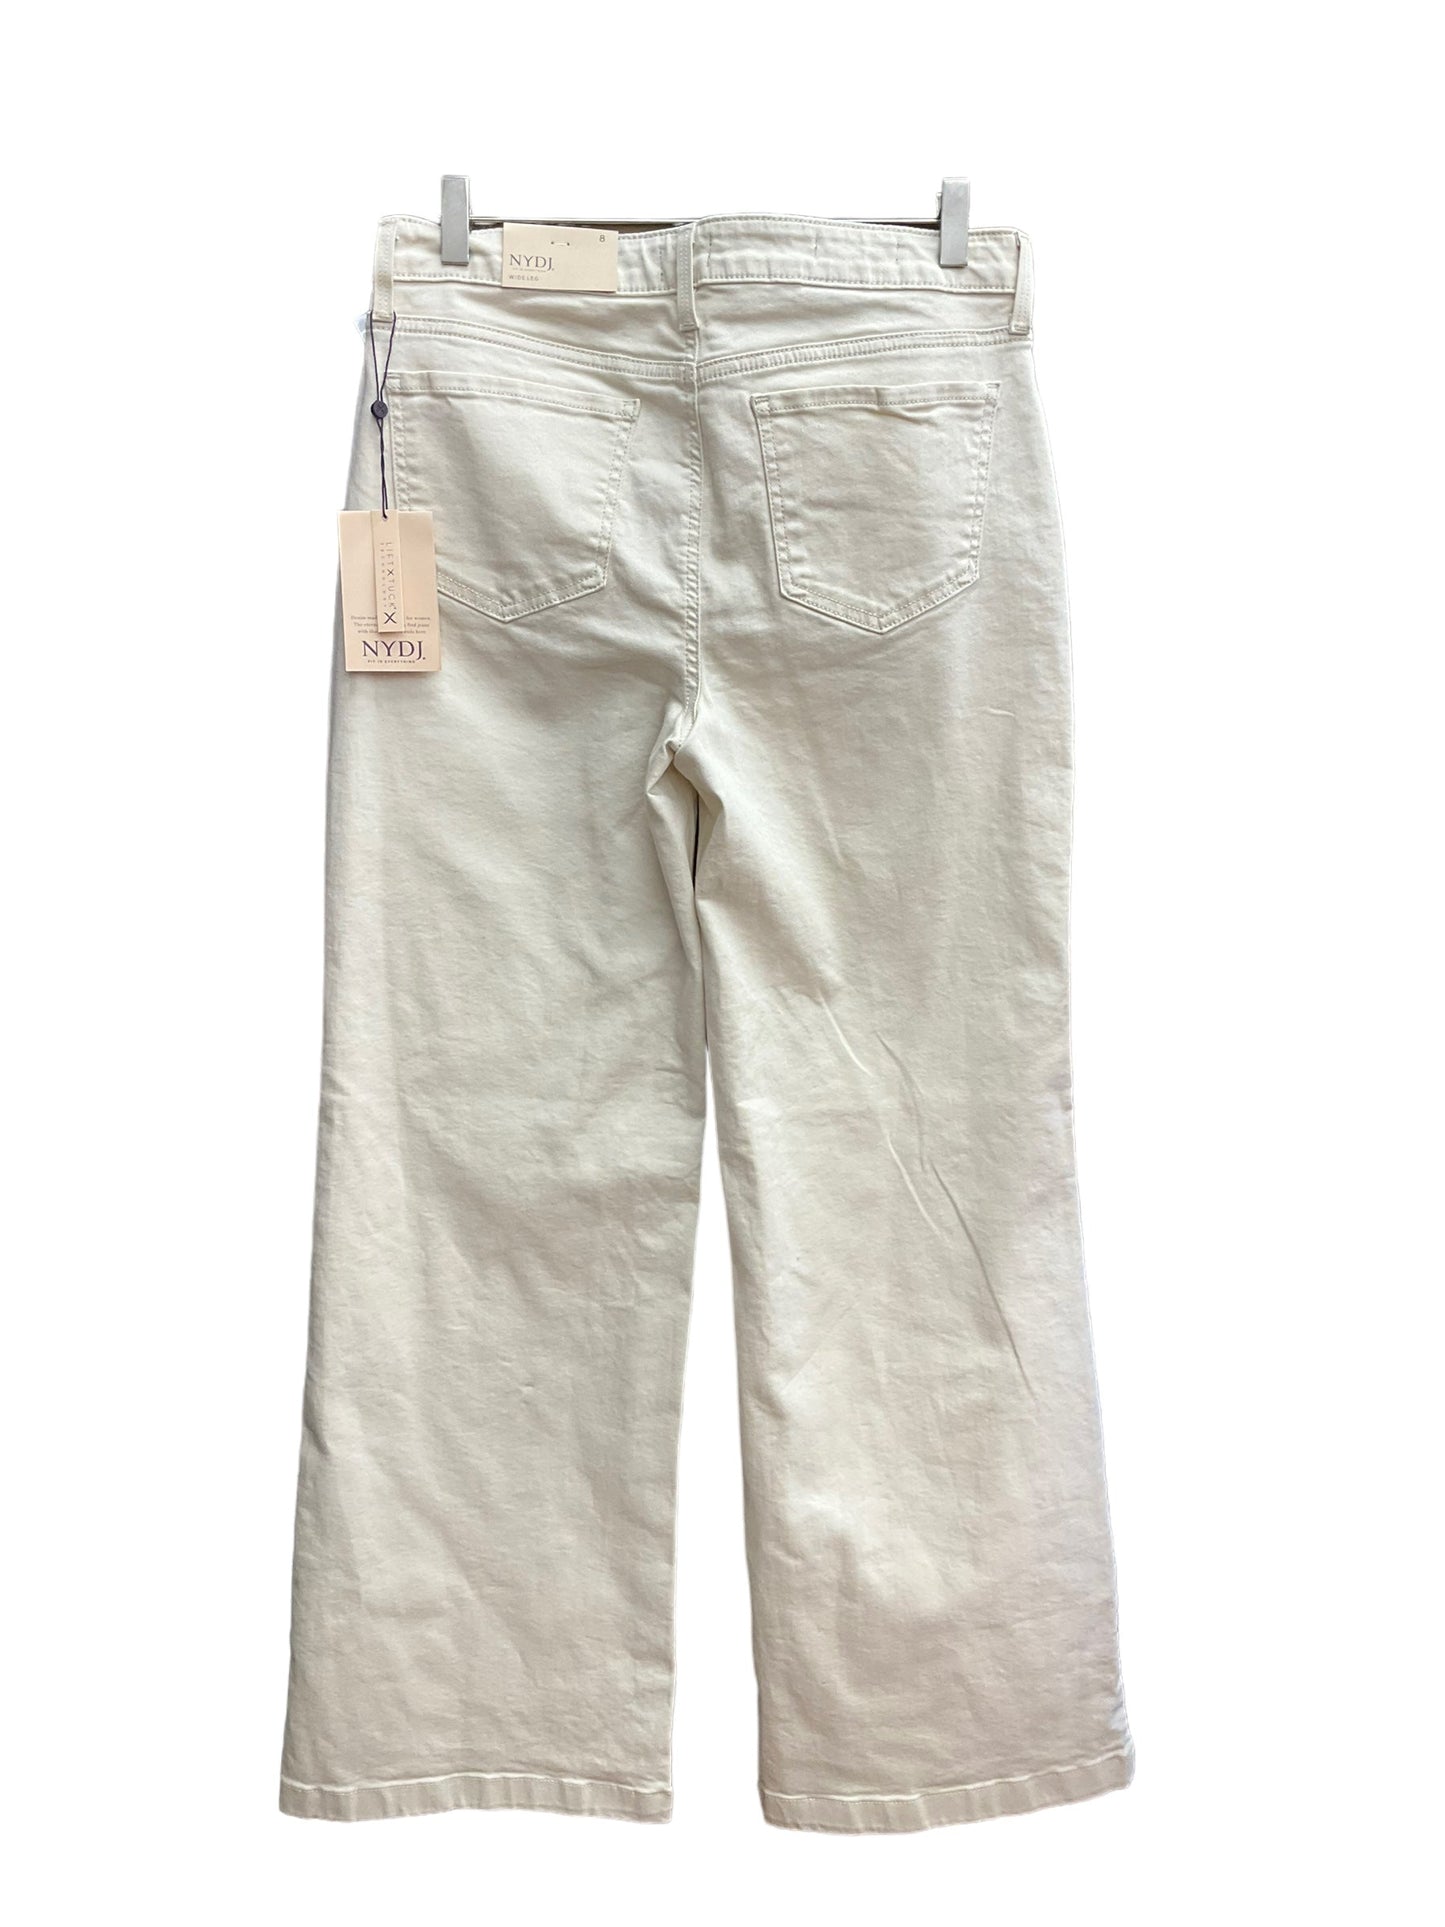 Cream Jeans Flared Not Your Daughters Jeans, Size 8